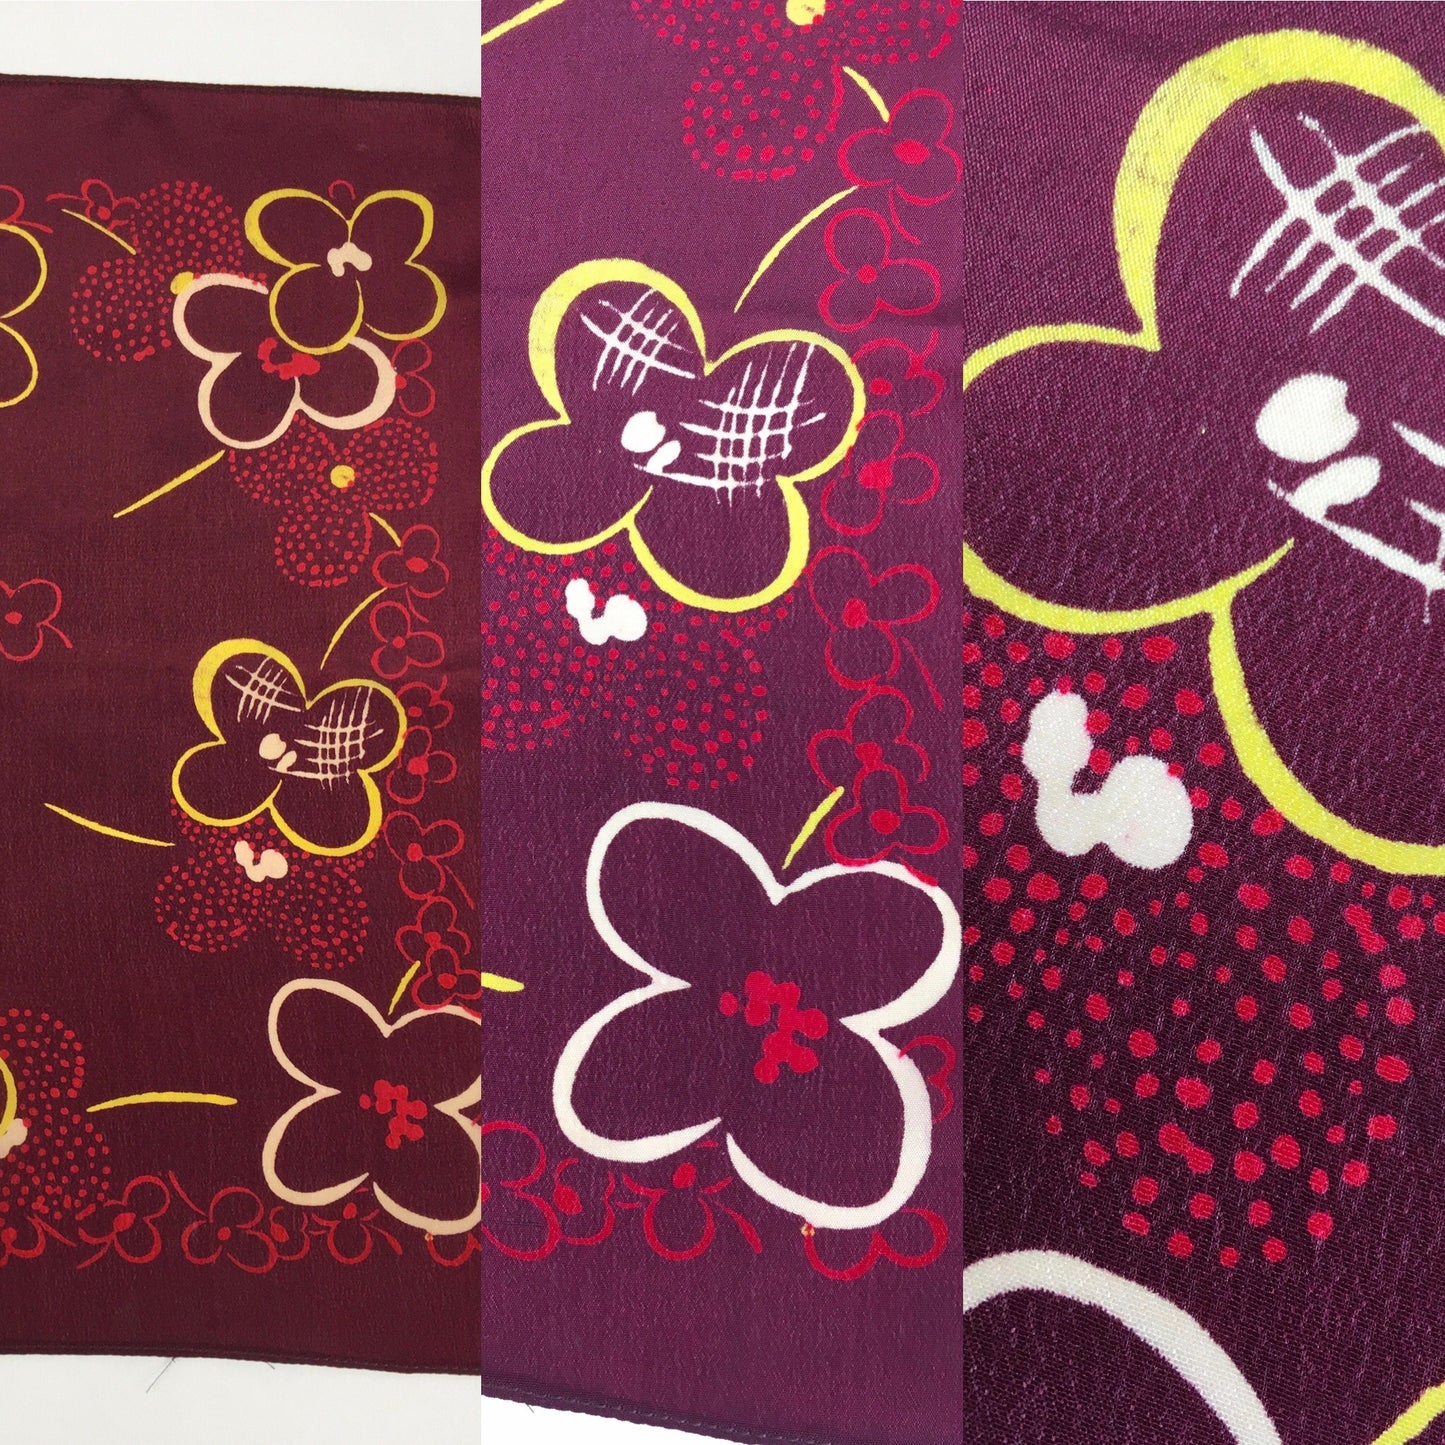 Original 1940’s / 1950’s Rayon Hankie - In a Burgundy, Yellow and Ivory Floral